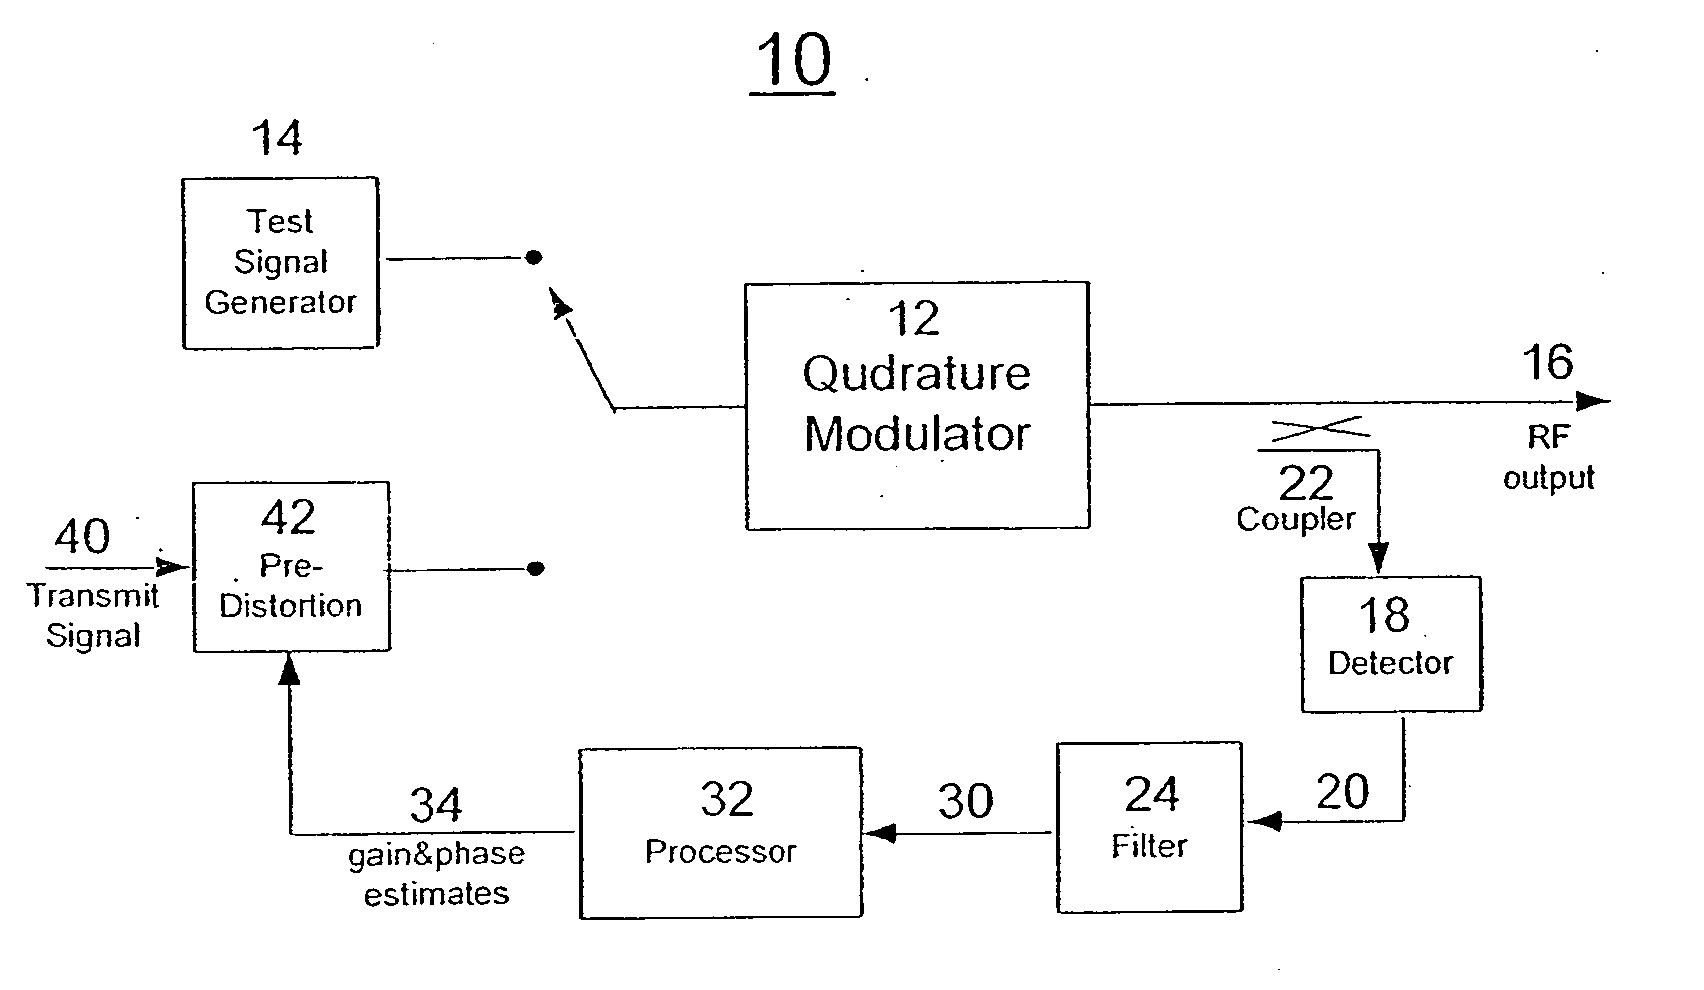 Method for measuring and compensating gain and phase imbalances in quadrature modulators